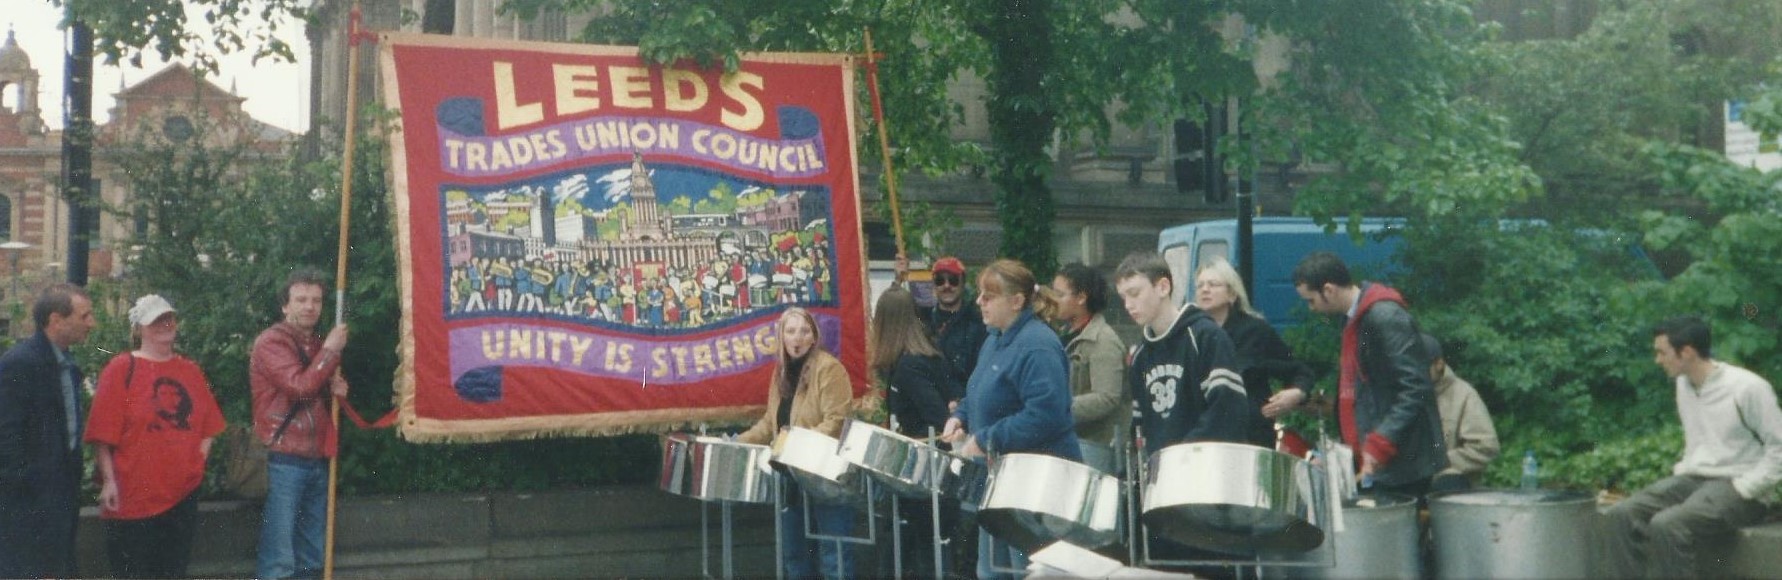 Foxwood 2003 at TUC May Day rally